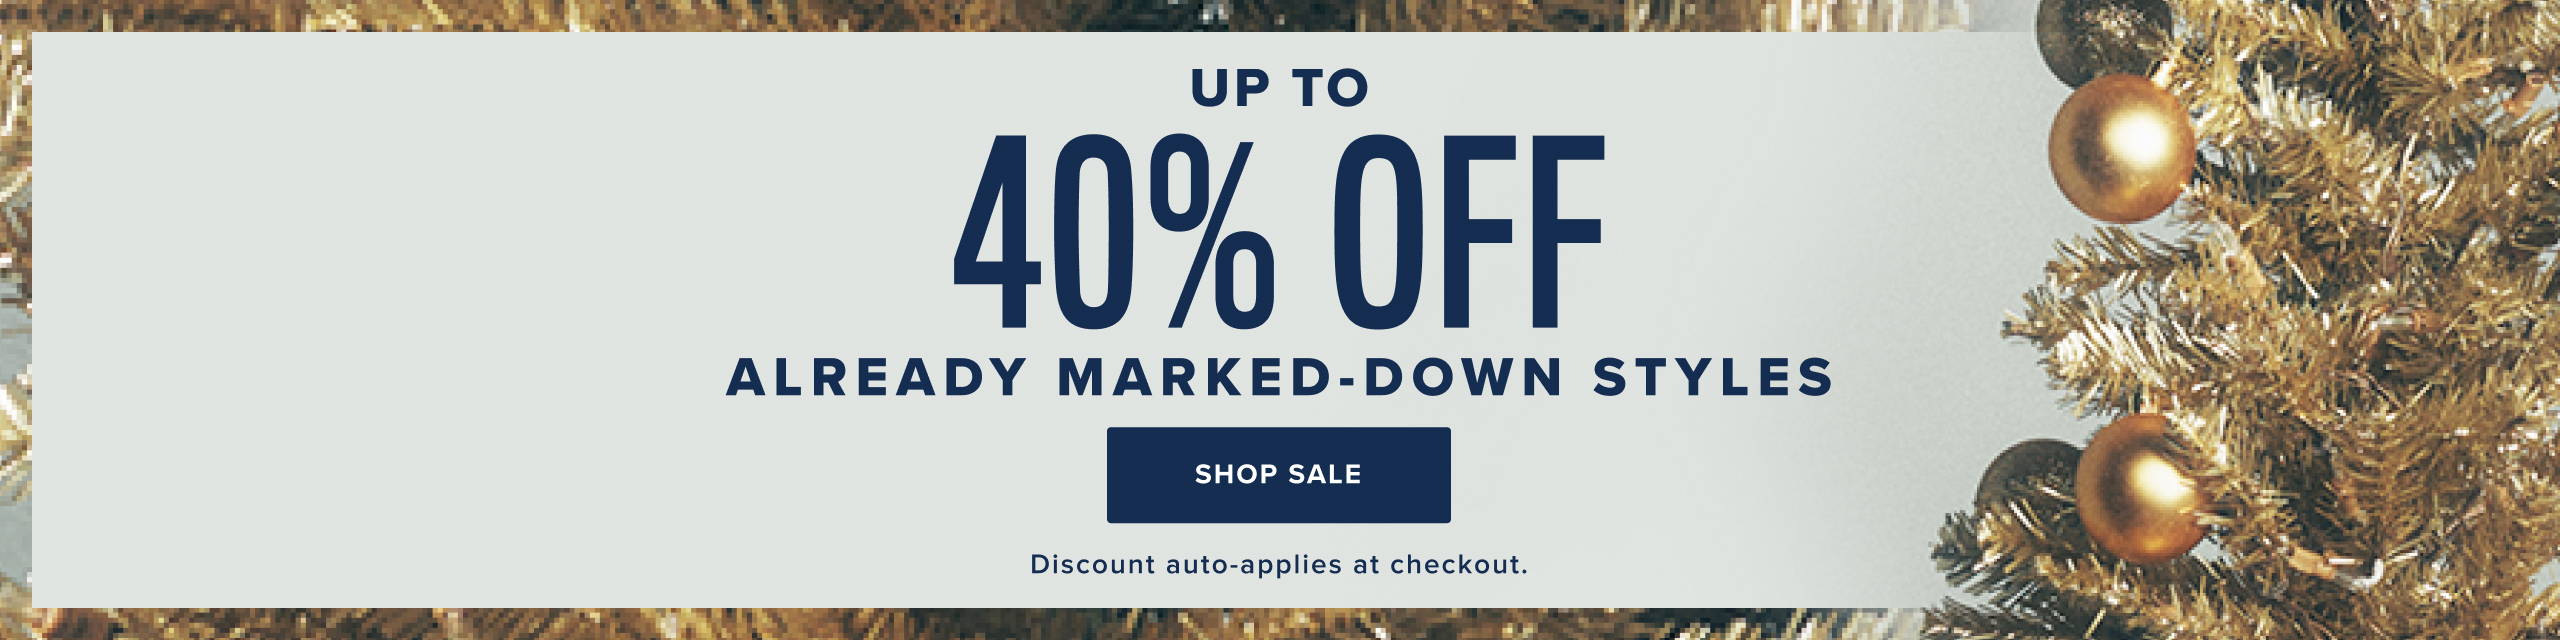 Up to 40% off already marked-down styles. Discount auto-applies at checkout. 